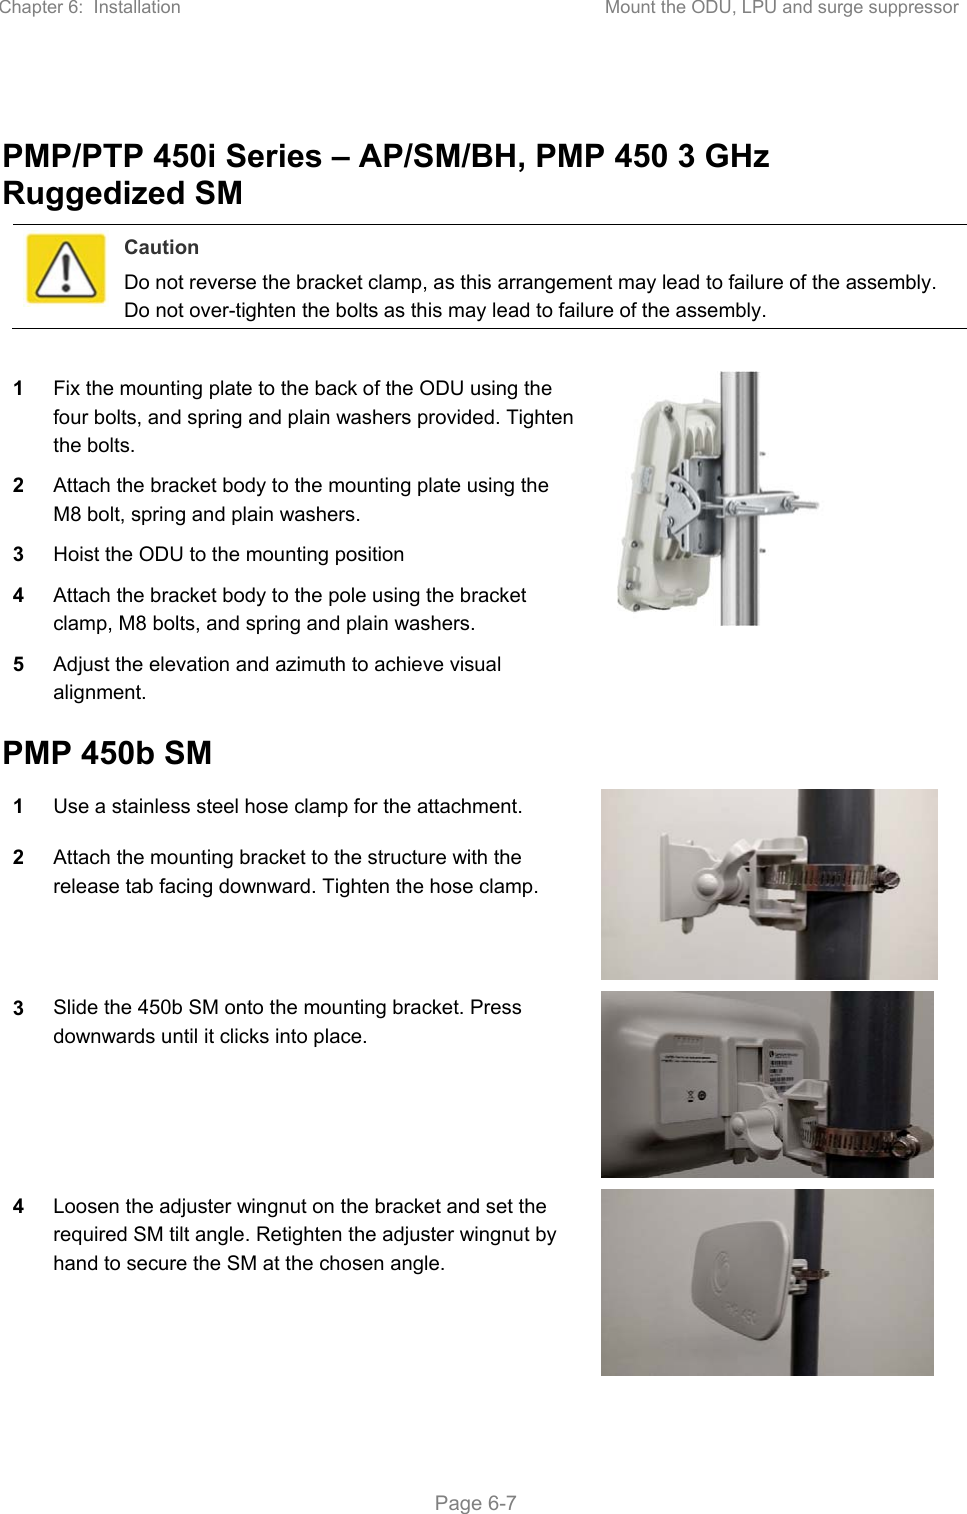 Chapter 6:  Installation  Mount the ODU, LPU and surge suppressor   Page 6-7  PMP/PTP 450i Series – AP/SM/BH, PMP 450 3 GHz Ruggedized SM  Caution Do not reverse the bracket clamp, as this arrangement may lead to failure of the assembly. Do not over-tighten the bolts as this may lead to failure of the assembly.  1 Fix the mounting plate to the back of the ODU using the four bolts, and spring and plain washers provided. Tighten the bolts.  2 Attach the bracket body to the mounting plate using the M8 bolt, spring and plain washers. 3 Hoist the ODU to the mounting position 4 Attach the bracket body to the pole using the bracket clamp, M8 bolts, and spring and plain washers. 5 Adjust the elevation and azimuth to achieve visual alignment. PMP 450b SM 1 Use a stainless steel hose clamp for the attachment.  2 Attach the mounting bracket to the structure with the release tab facing downward. Tighten the hose clamp. 3 Slide the 450b SM onto the mounting bracket. Press downwards until it clicks into place.  4 Loosen the adjuster wingnut on the bracket and set the required SM tilt angle. Retighten the adjuster wingnut by hand to secure the SM at the chosen angle.  